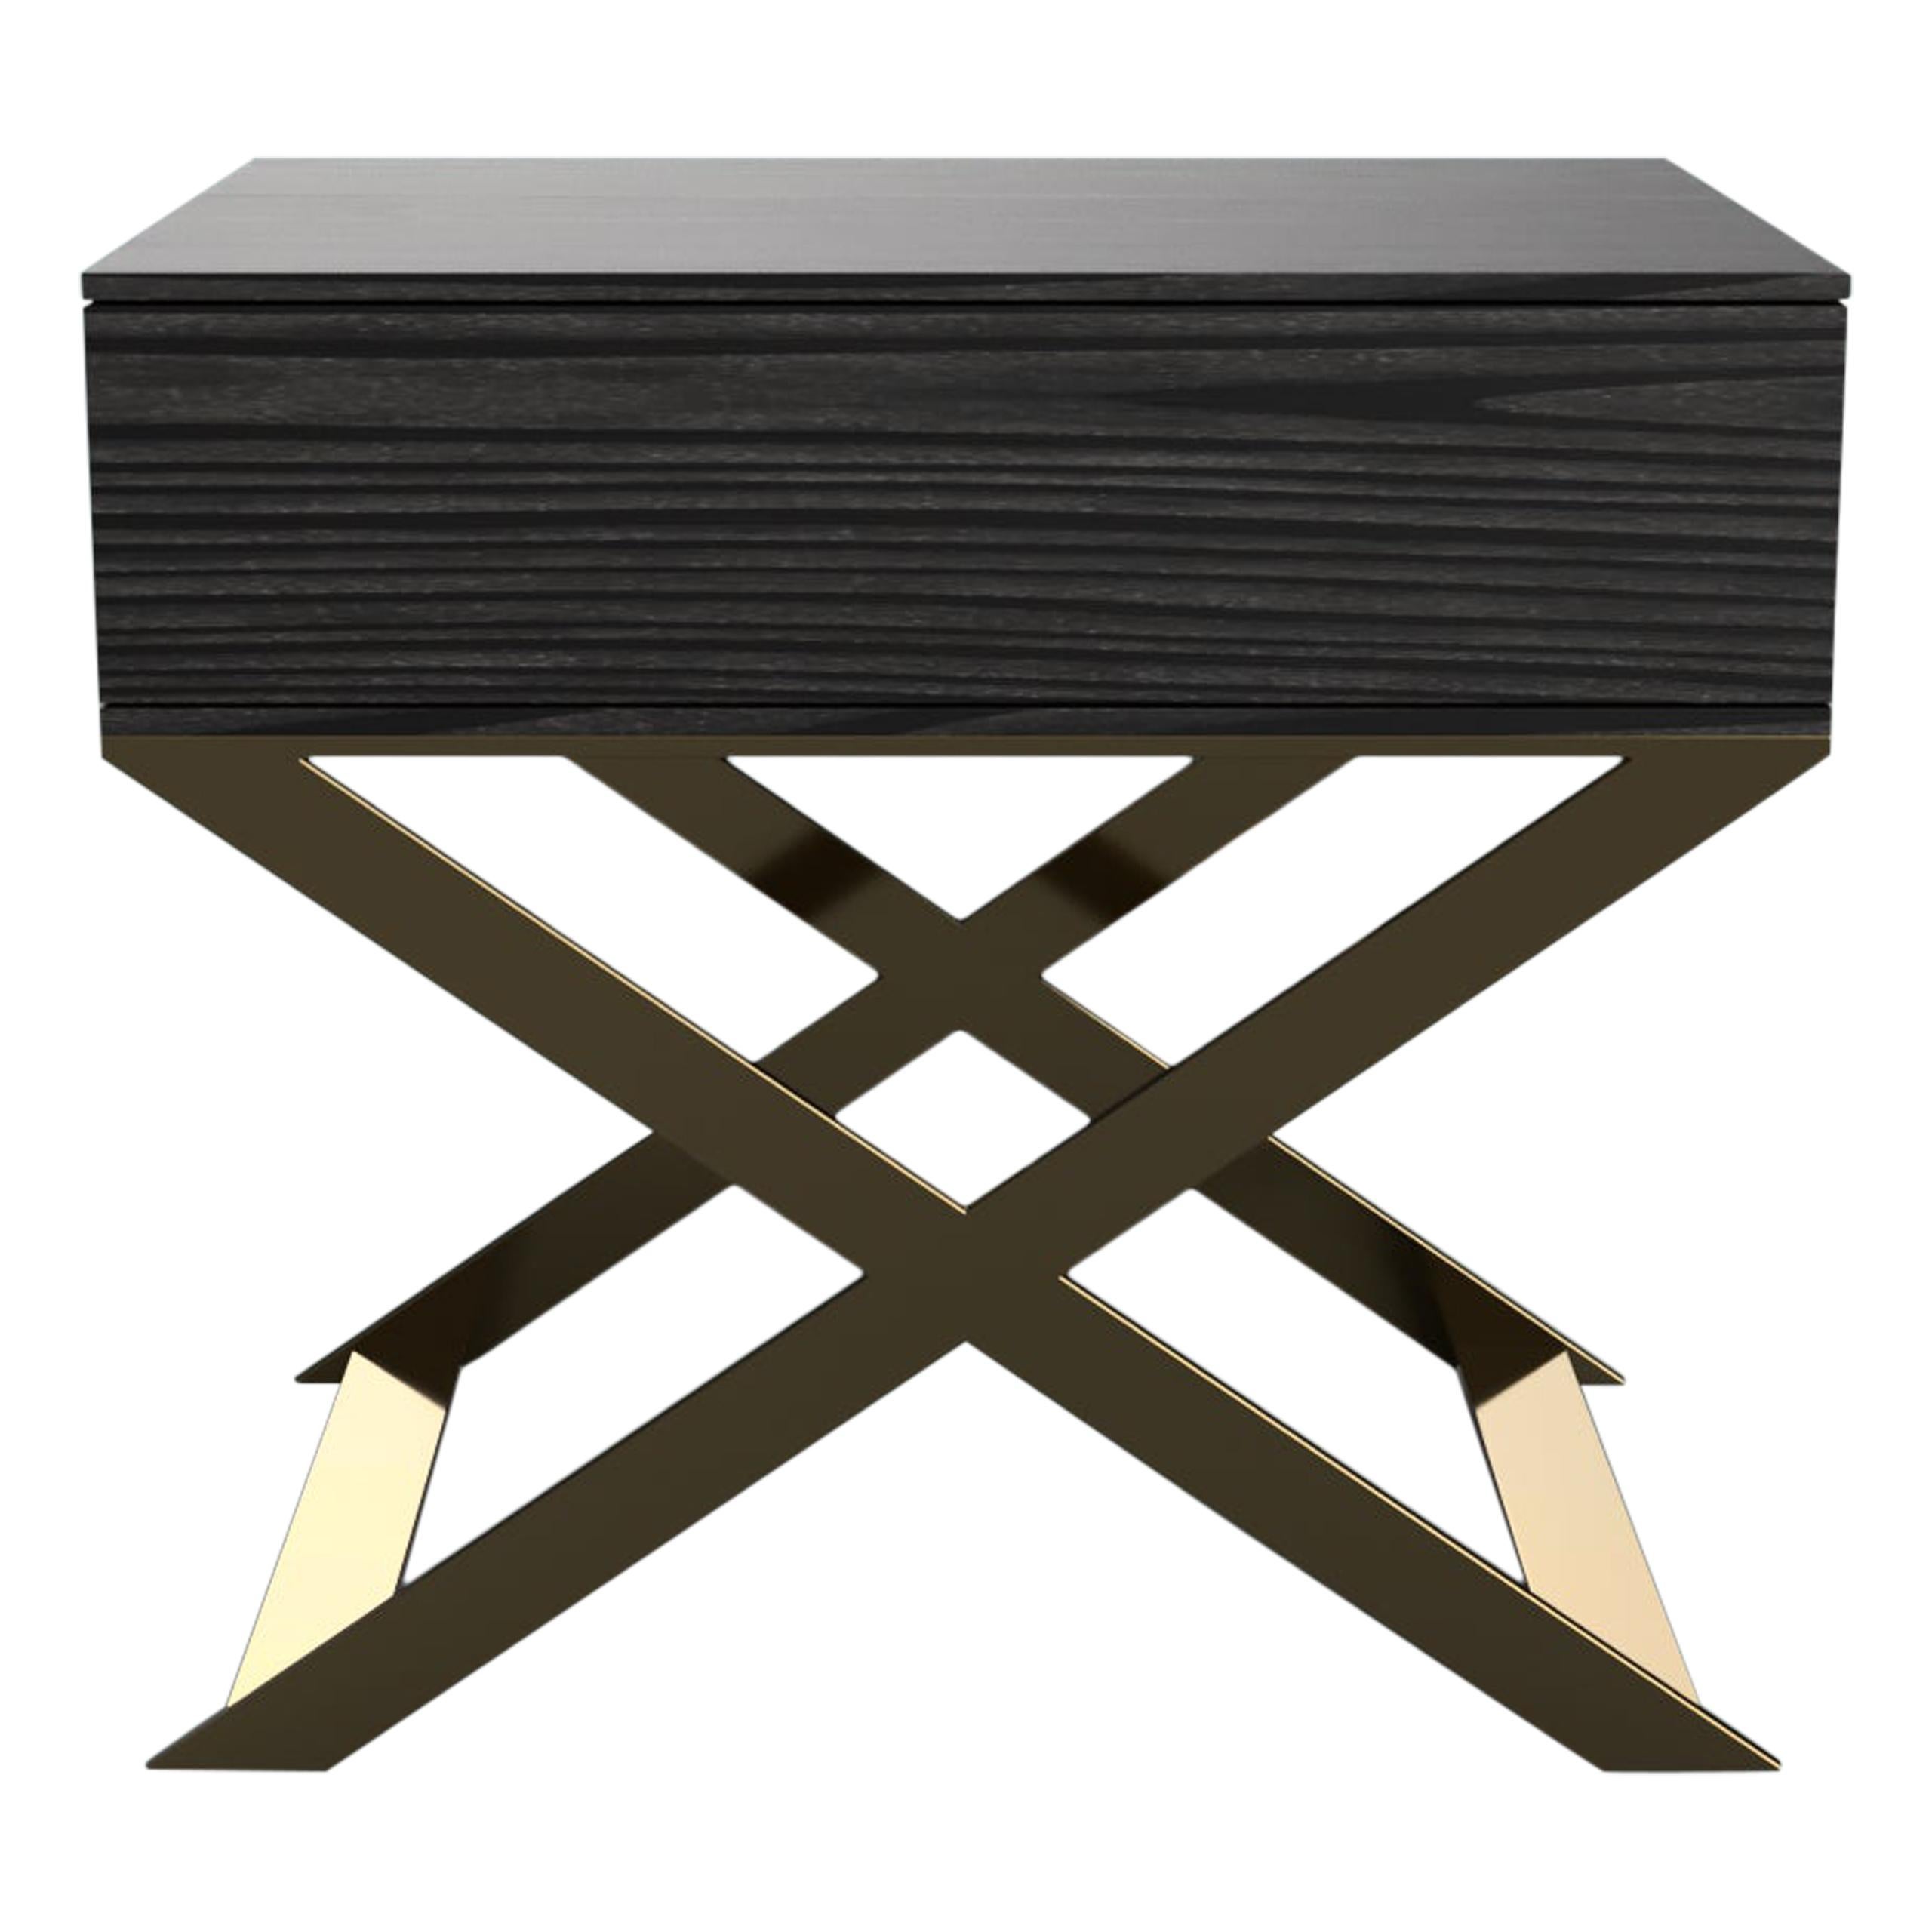 X-Leg Bedside Table in Black Lacquered and Steel Legs